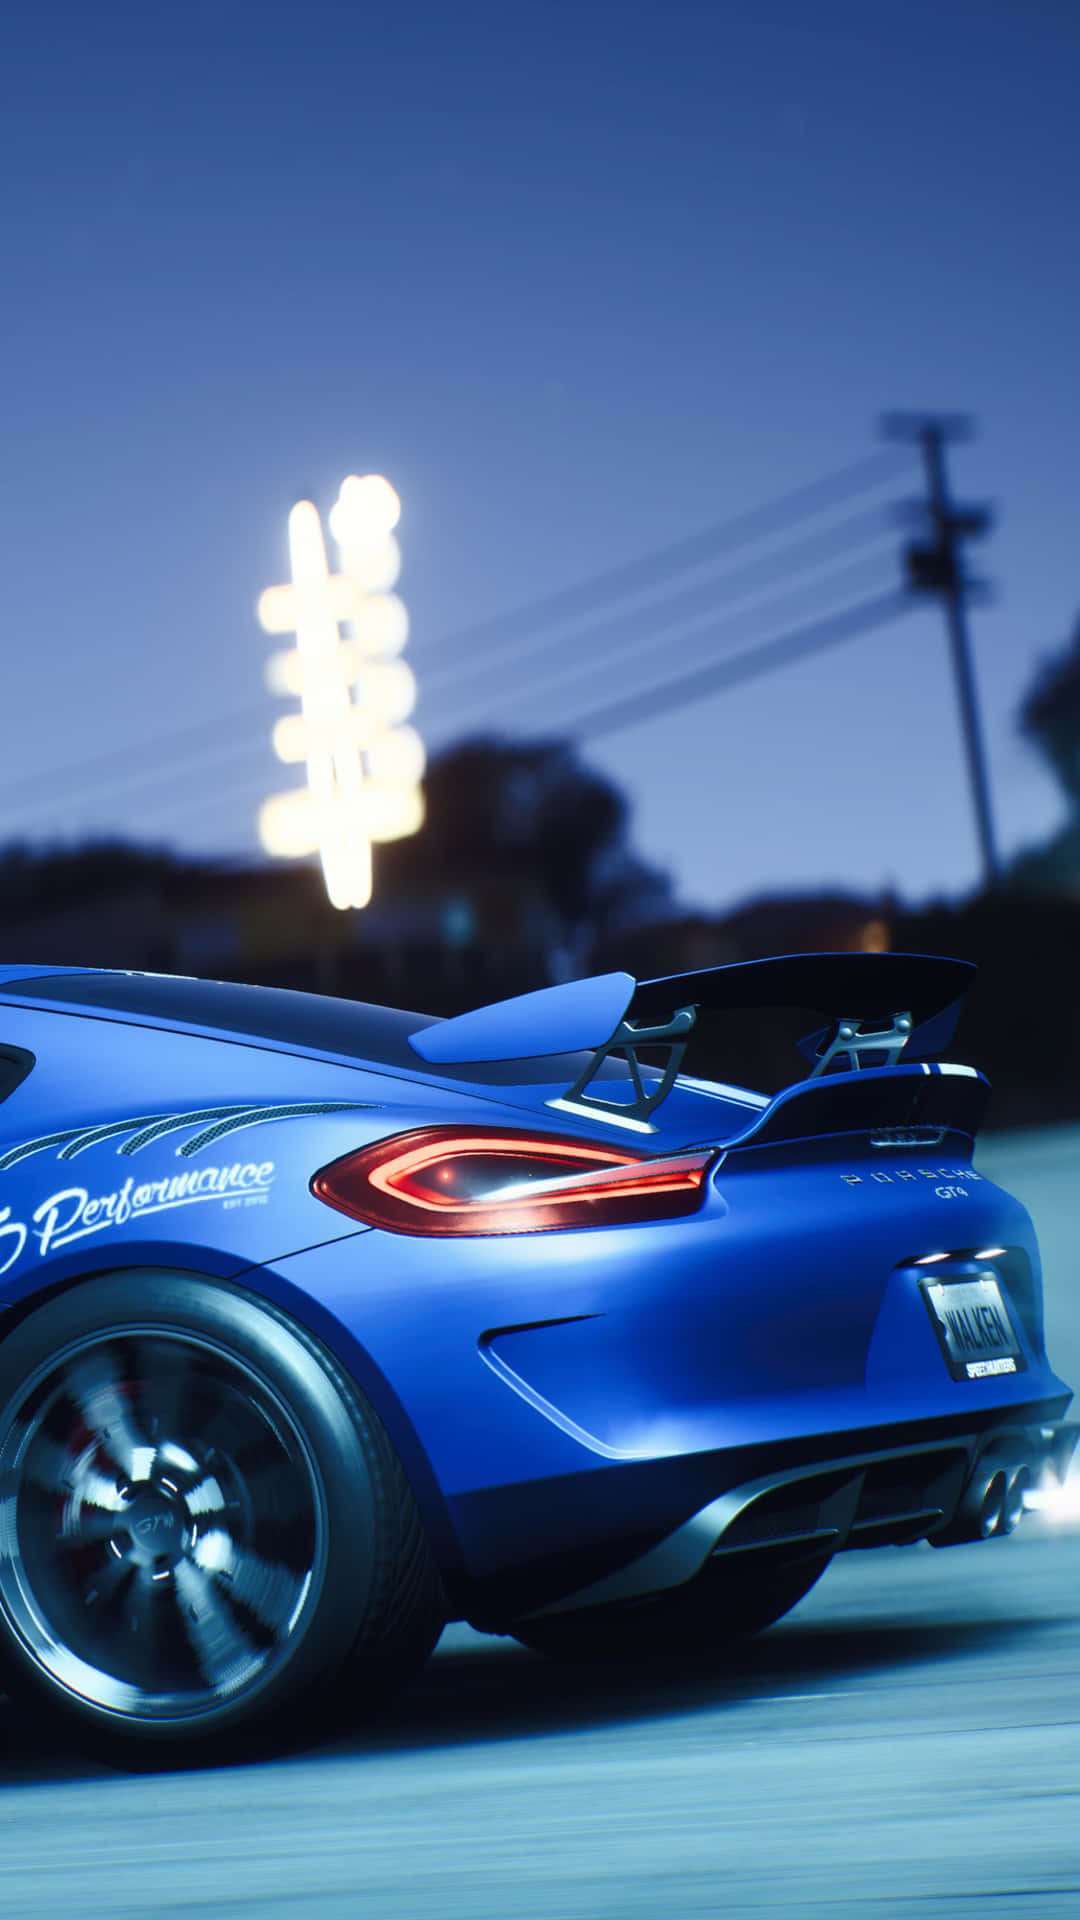 Iphone Xs Need For Speed Payback Background Dark Blue Porsche Cayman